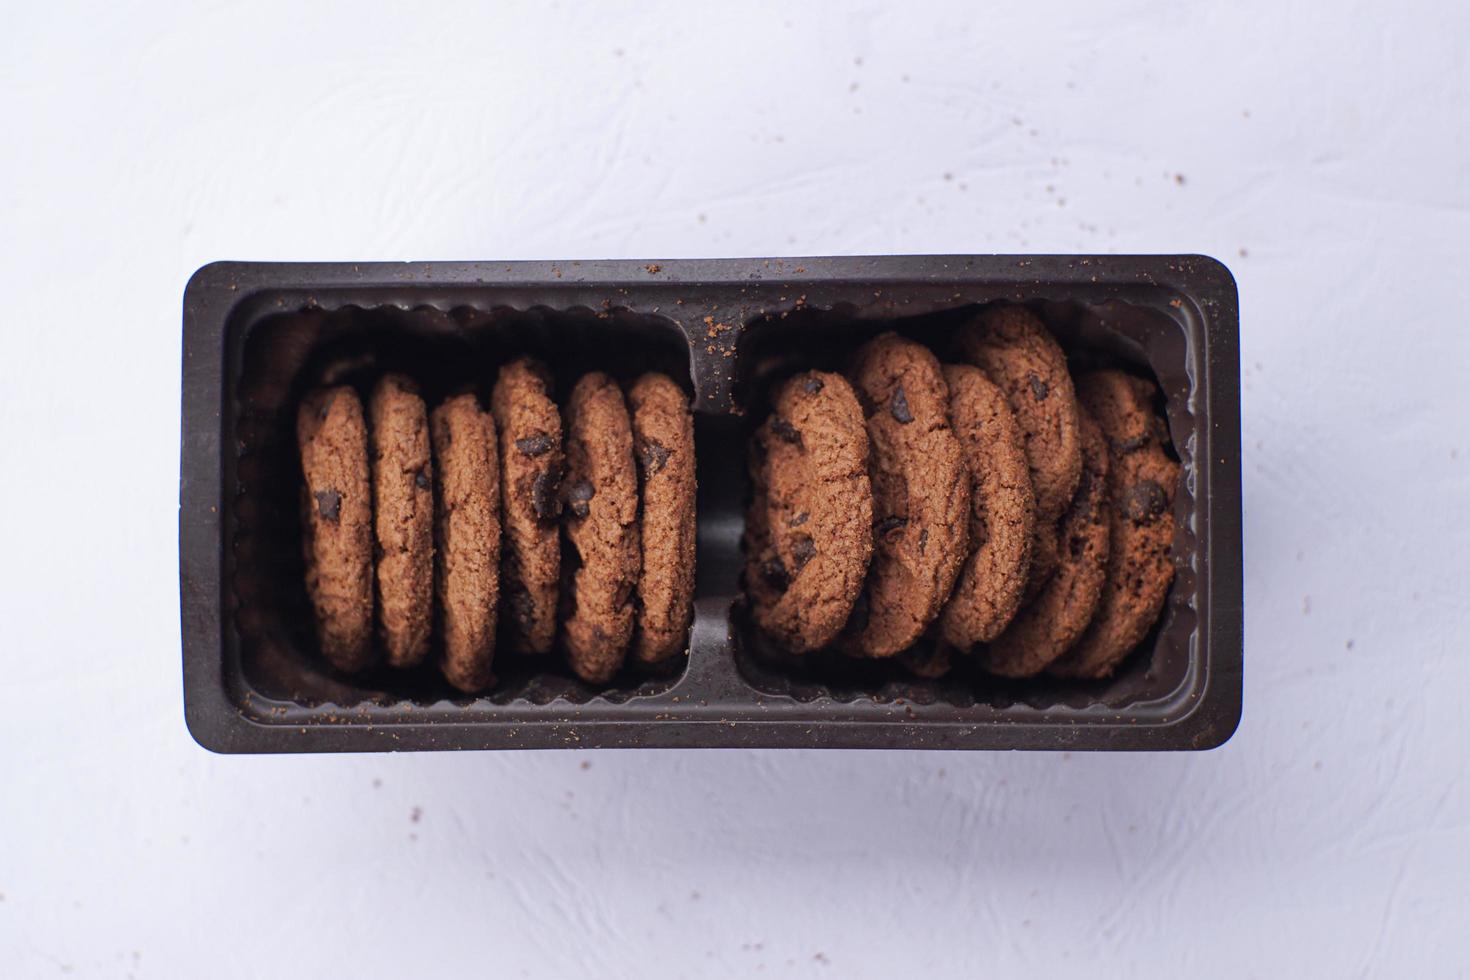 Chocolate cookies on a white table photo